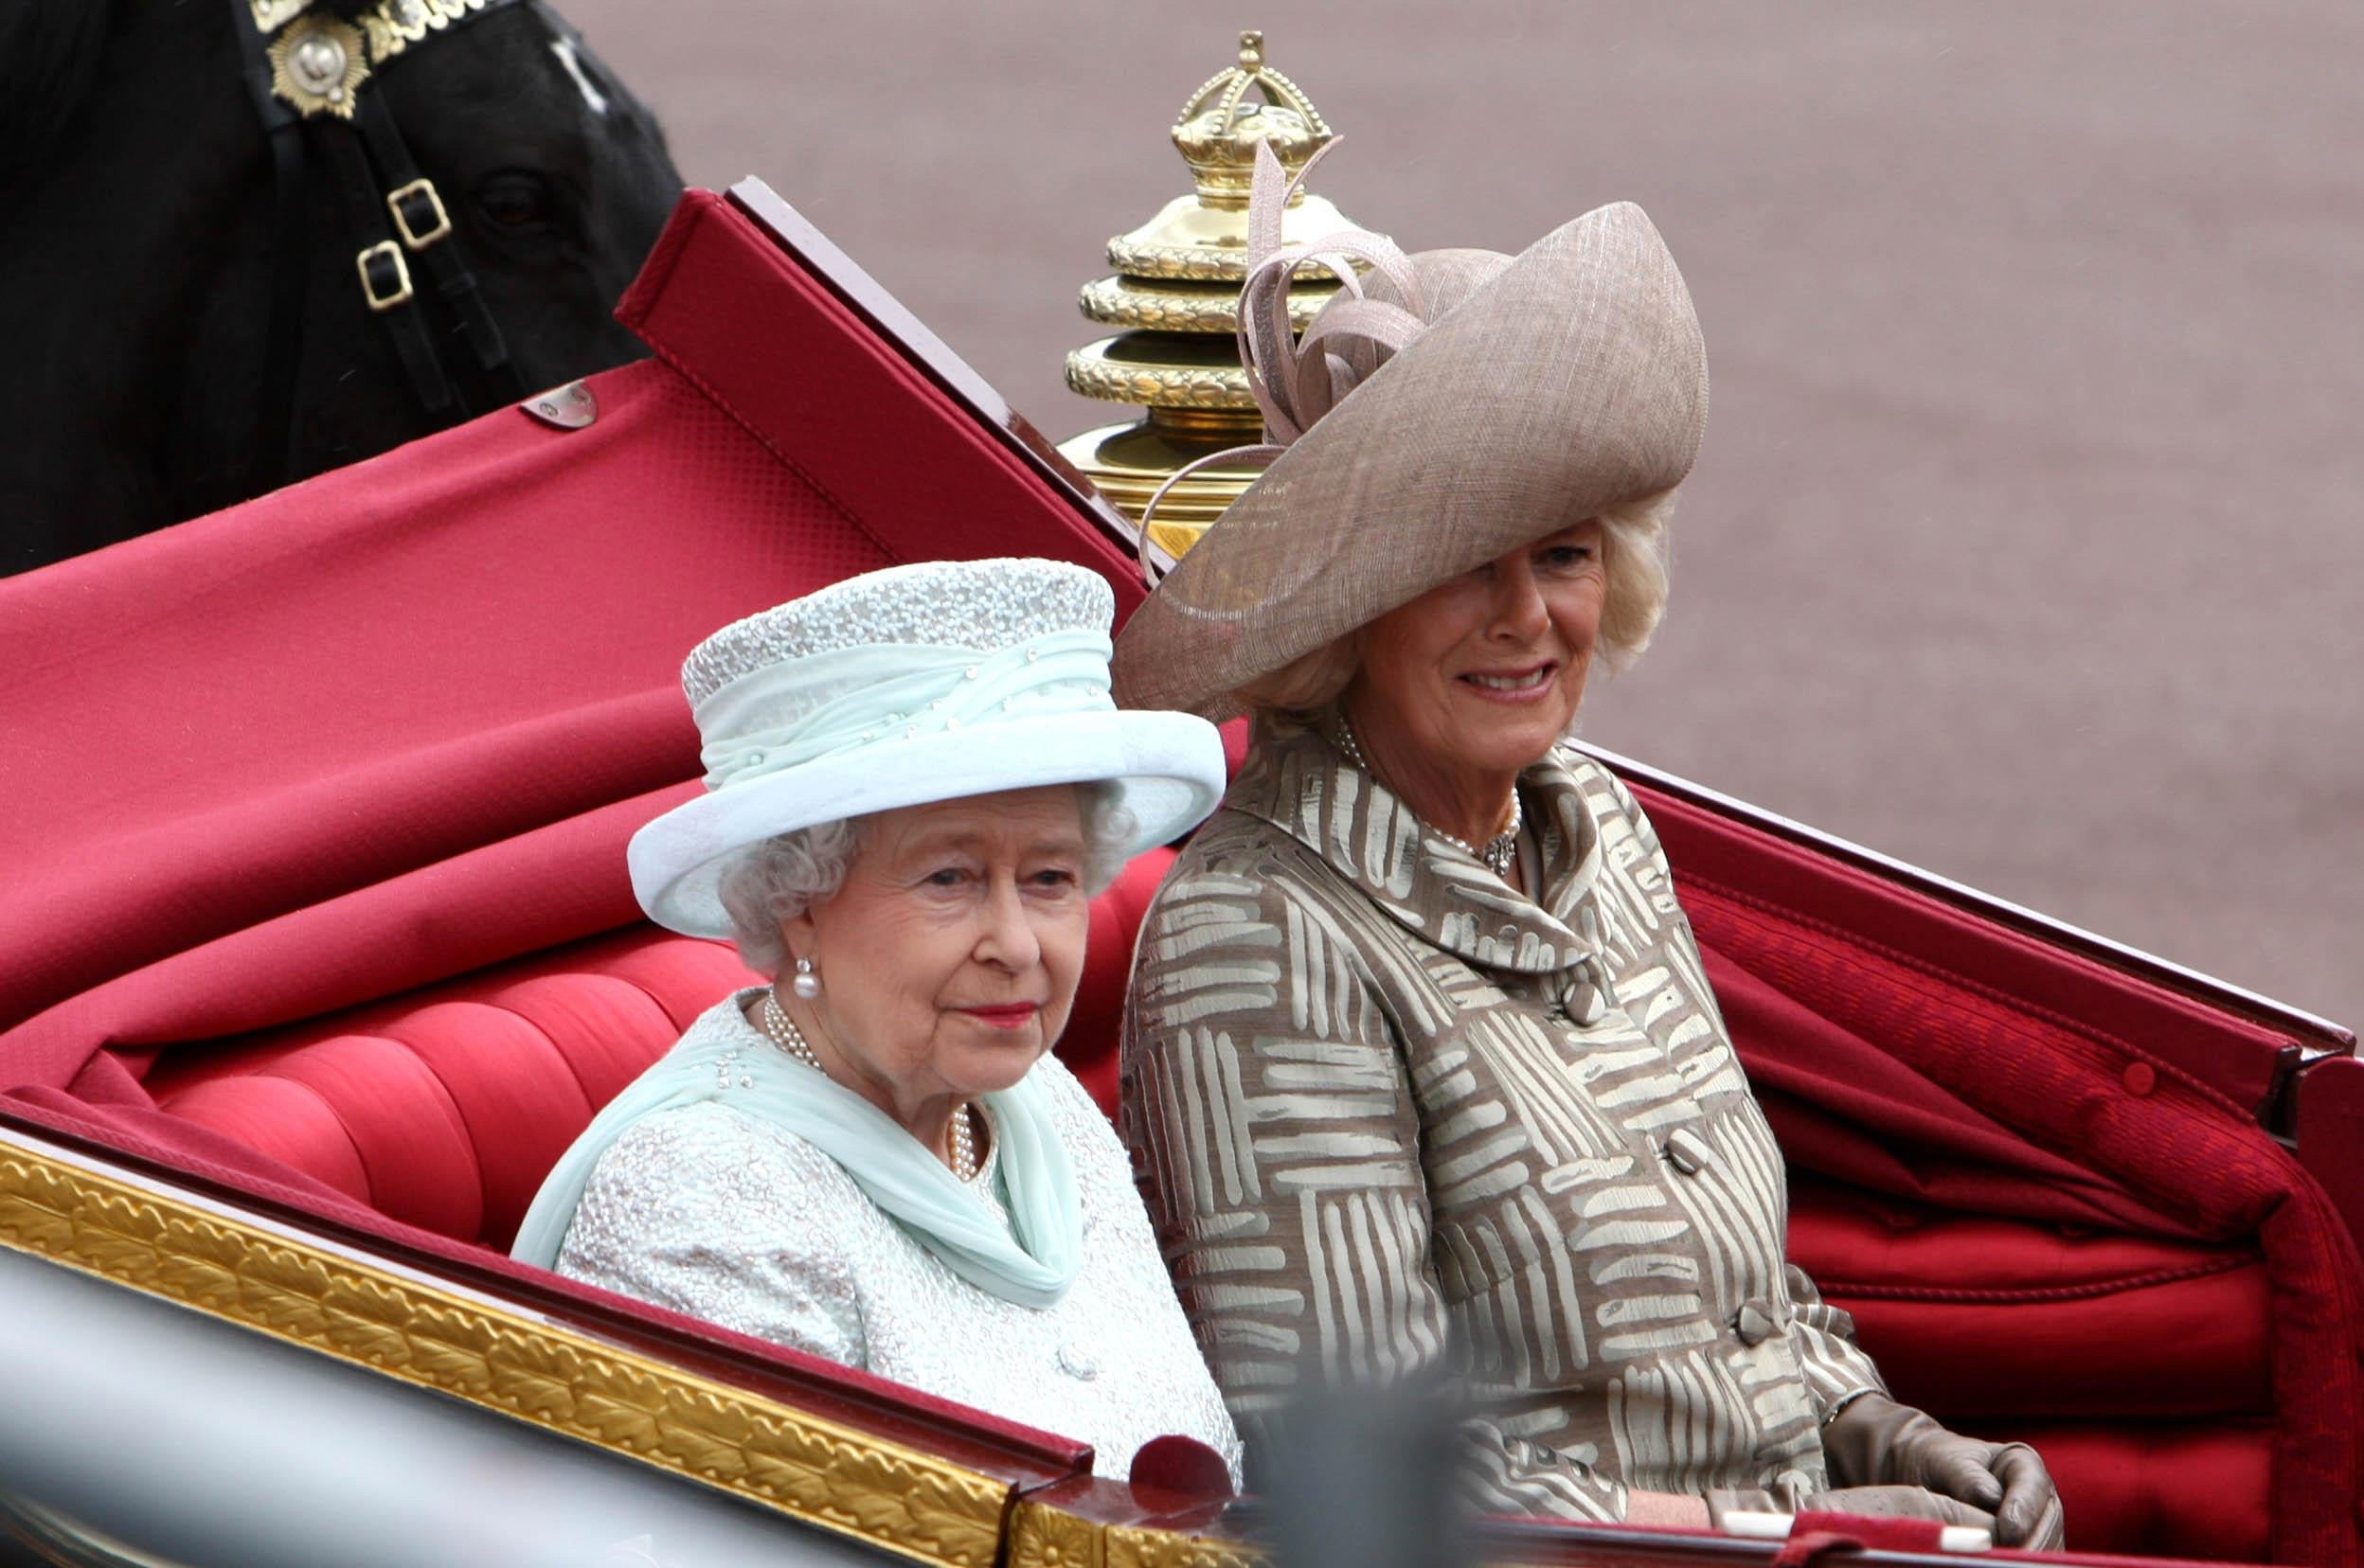 Queen Elizabeth II and the Duchess of Cornwall riding side by side in a carriage to Buckingham Palace during the Diamond Jubilee celebrations (David Jones/PA)